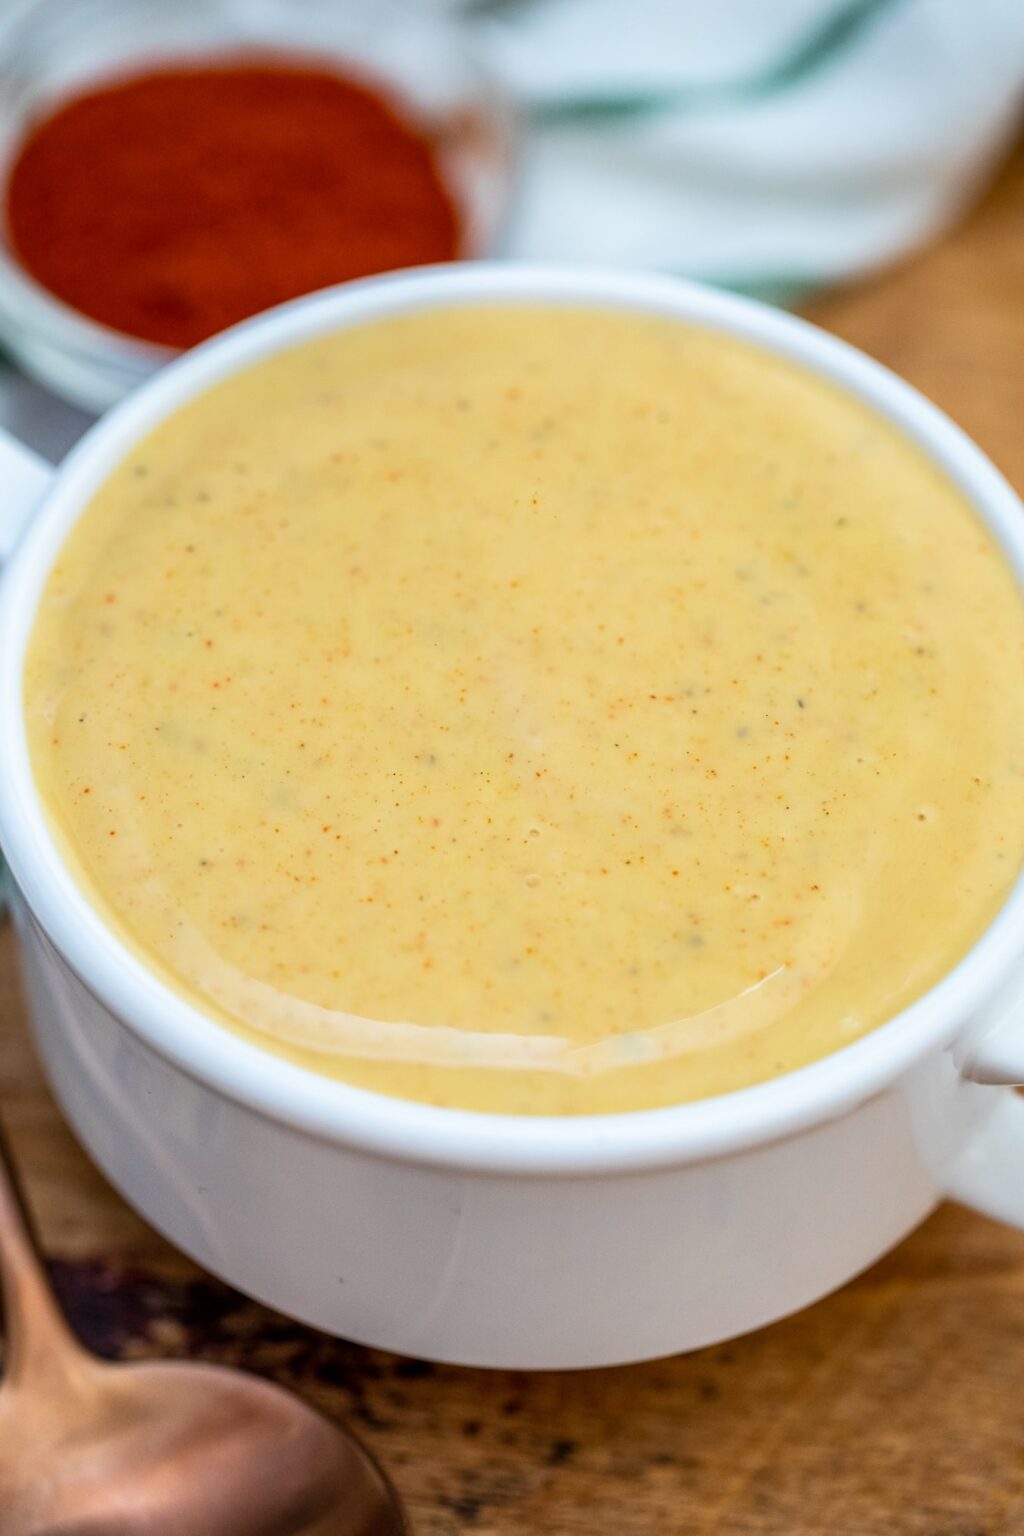 Honey Mustard Sauce. The Best Dip Recipe [Video] - Sweet and Savory Meals